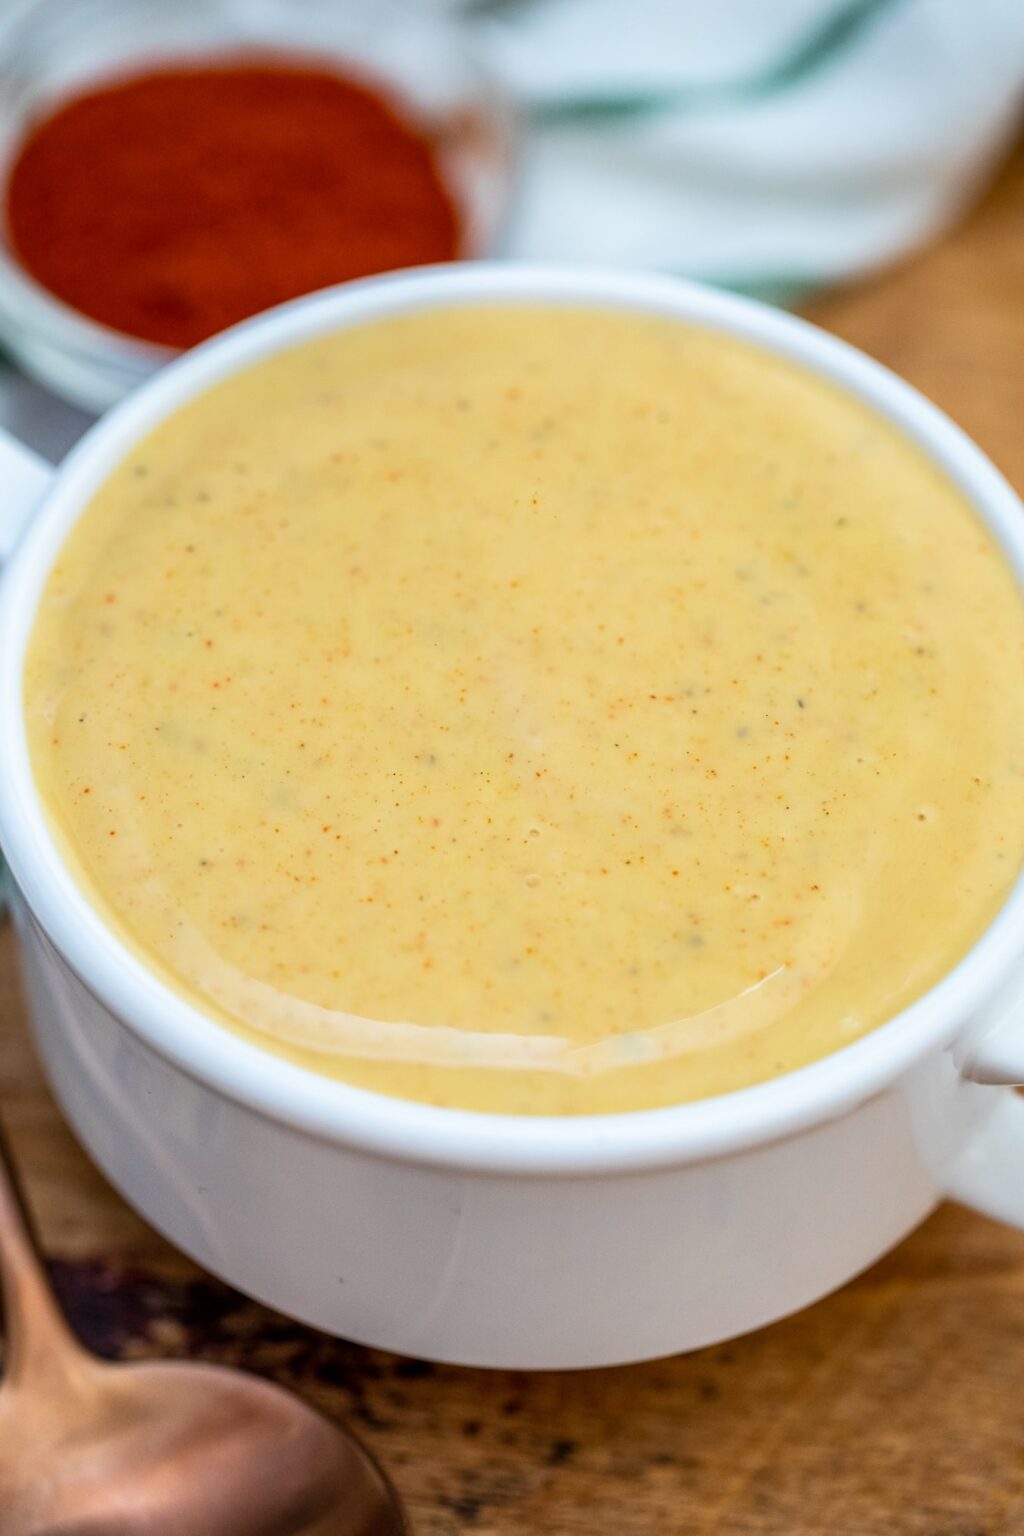 Honey Mustard Sauce. The Best Dip Recipe [Video] - Sweet and Savory Meals